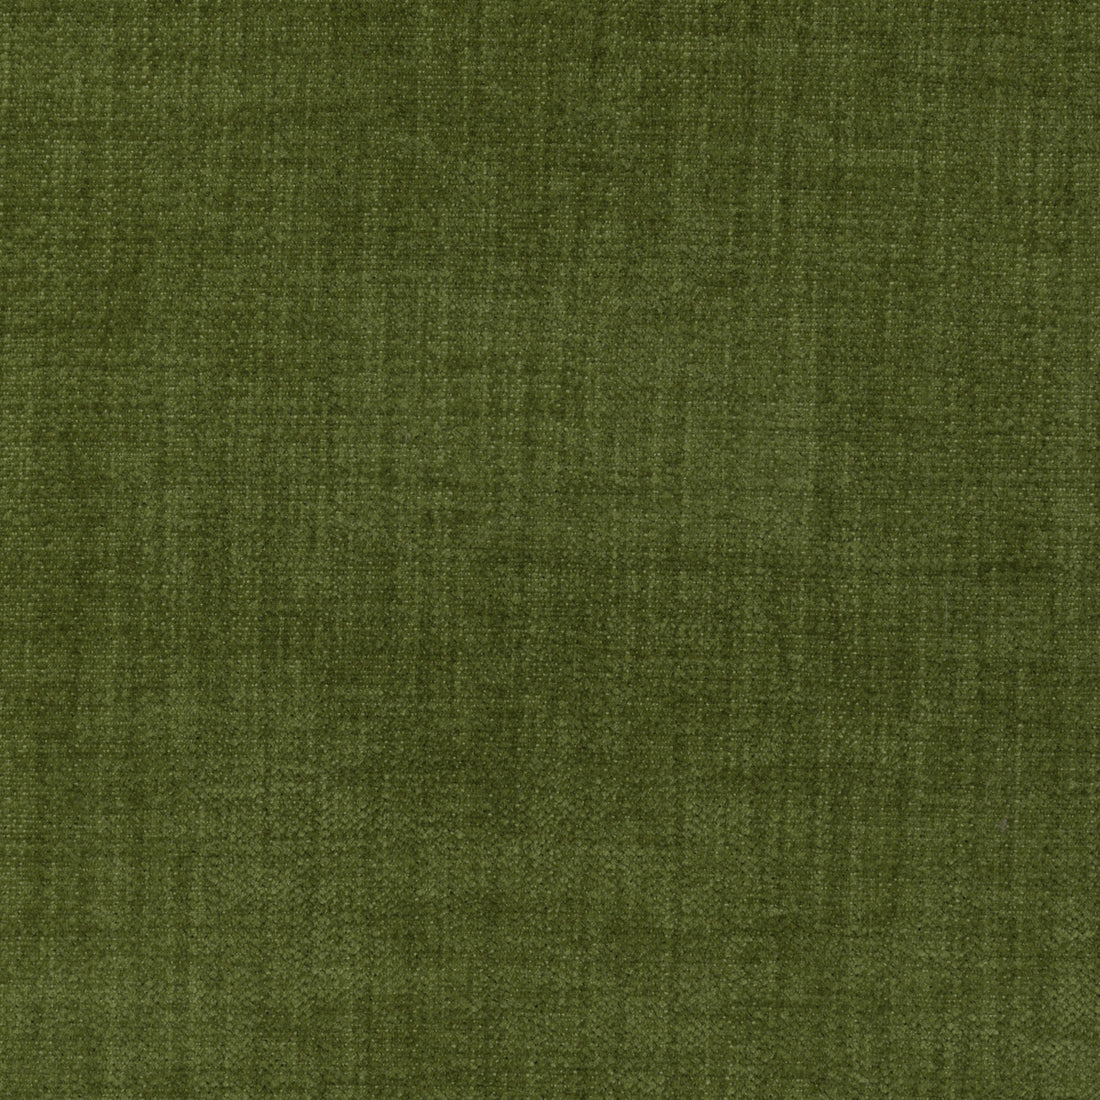 Accommodate fabric in moss color - pattern 36255.30.0 - by Kravet Contract in the Supreen collection